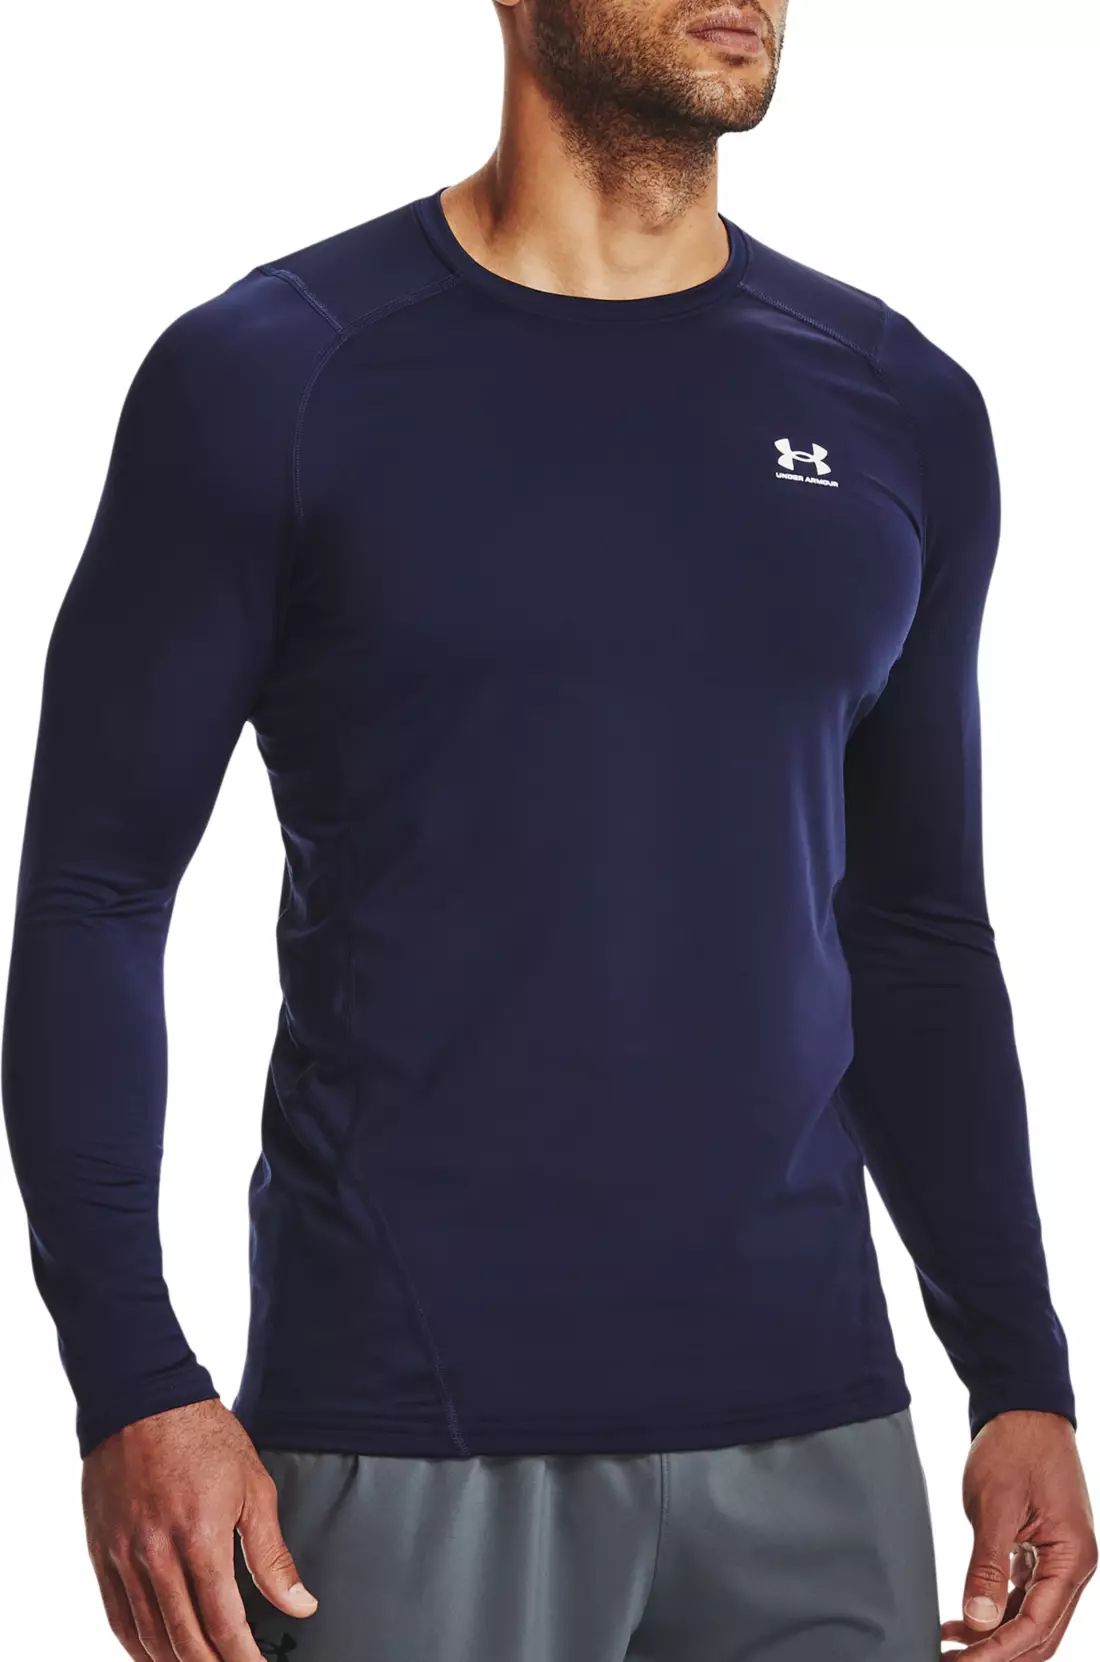 Under Armour Men's ColdGear Armour Fitted Crew | Dick's Sporting Goods